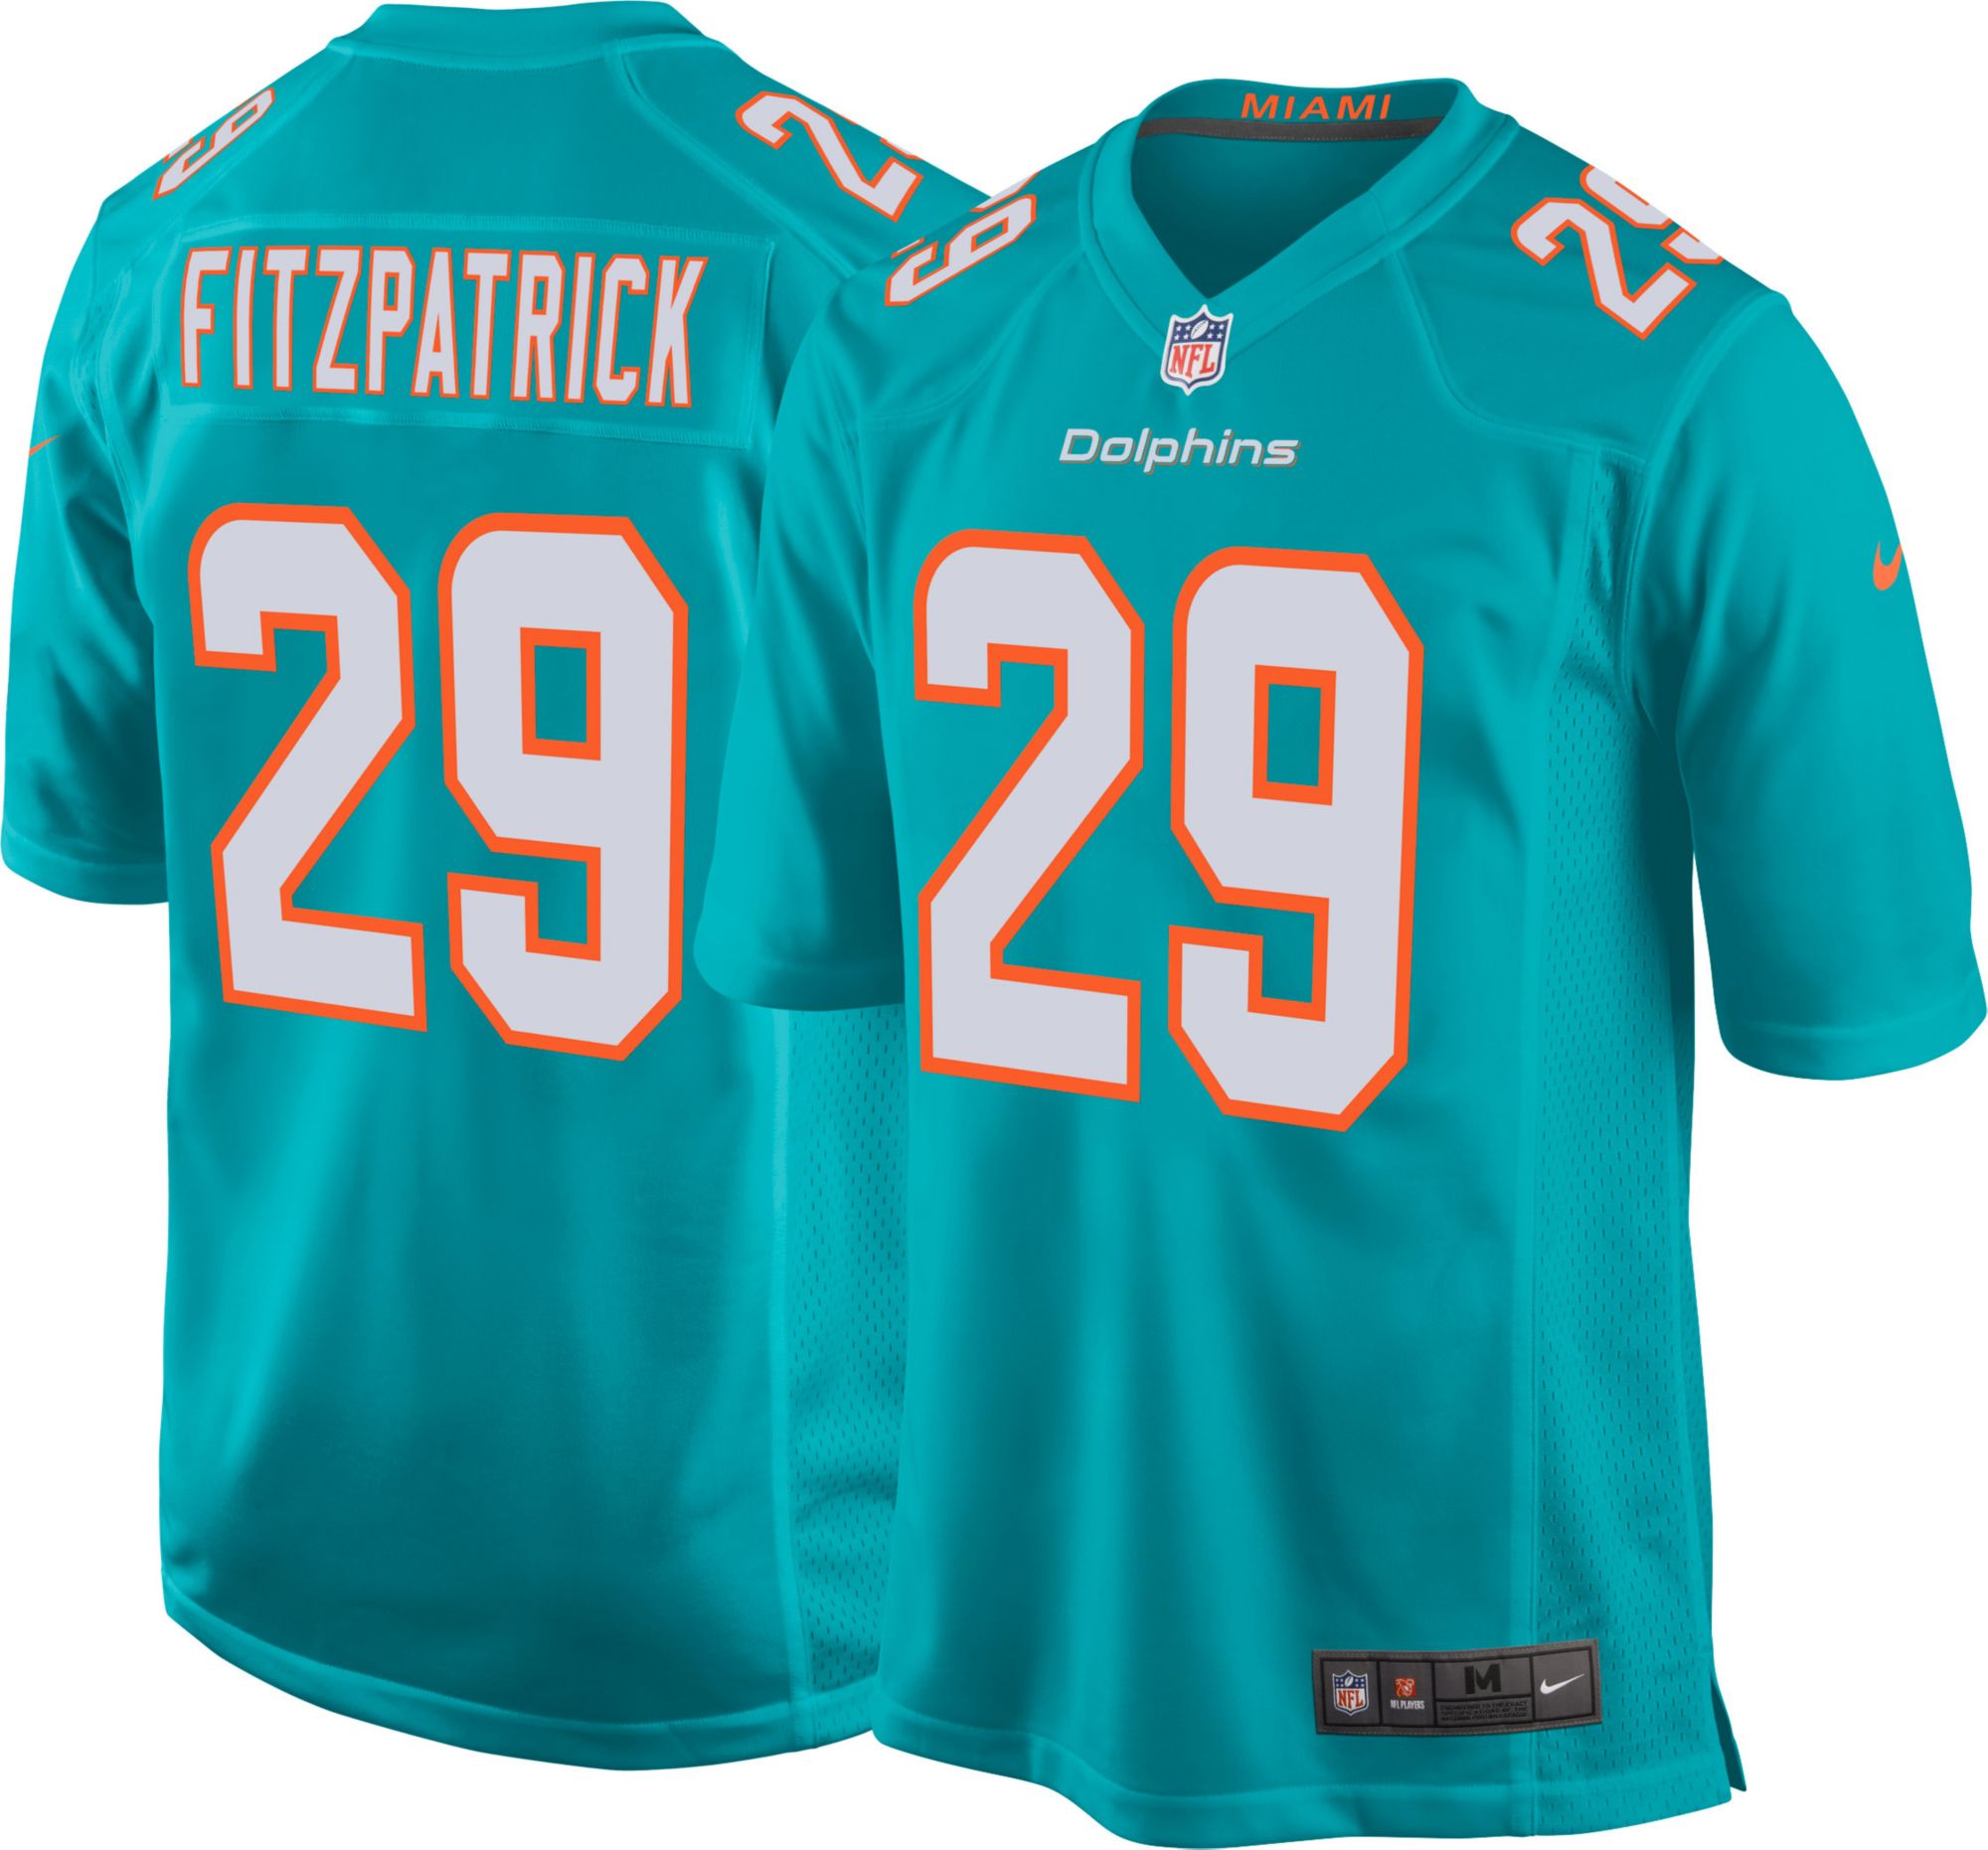 miami dolphins t shirt jersey